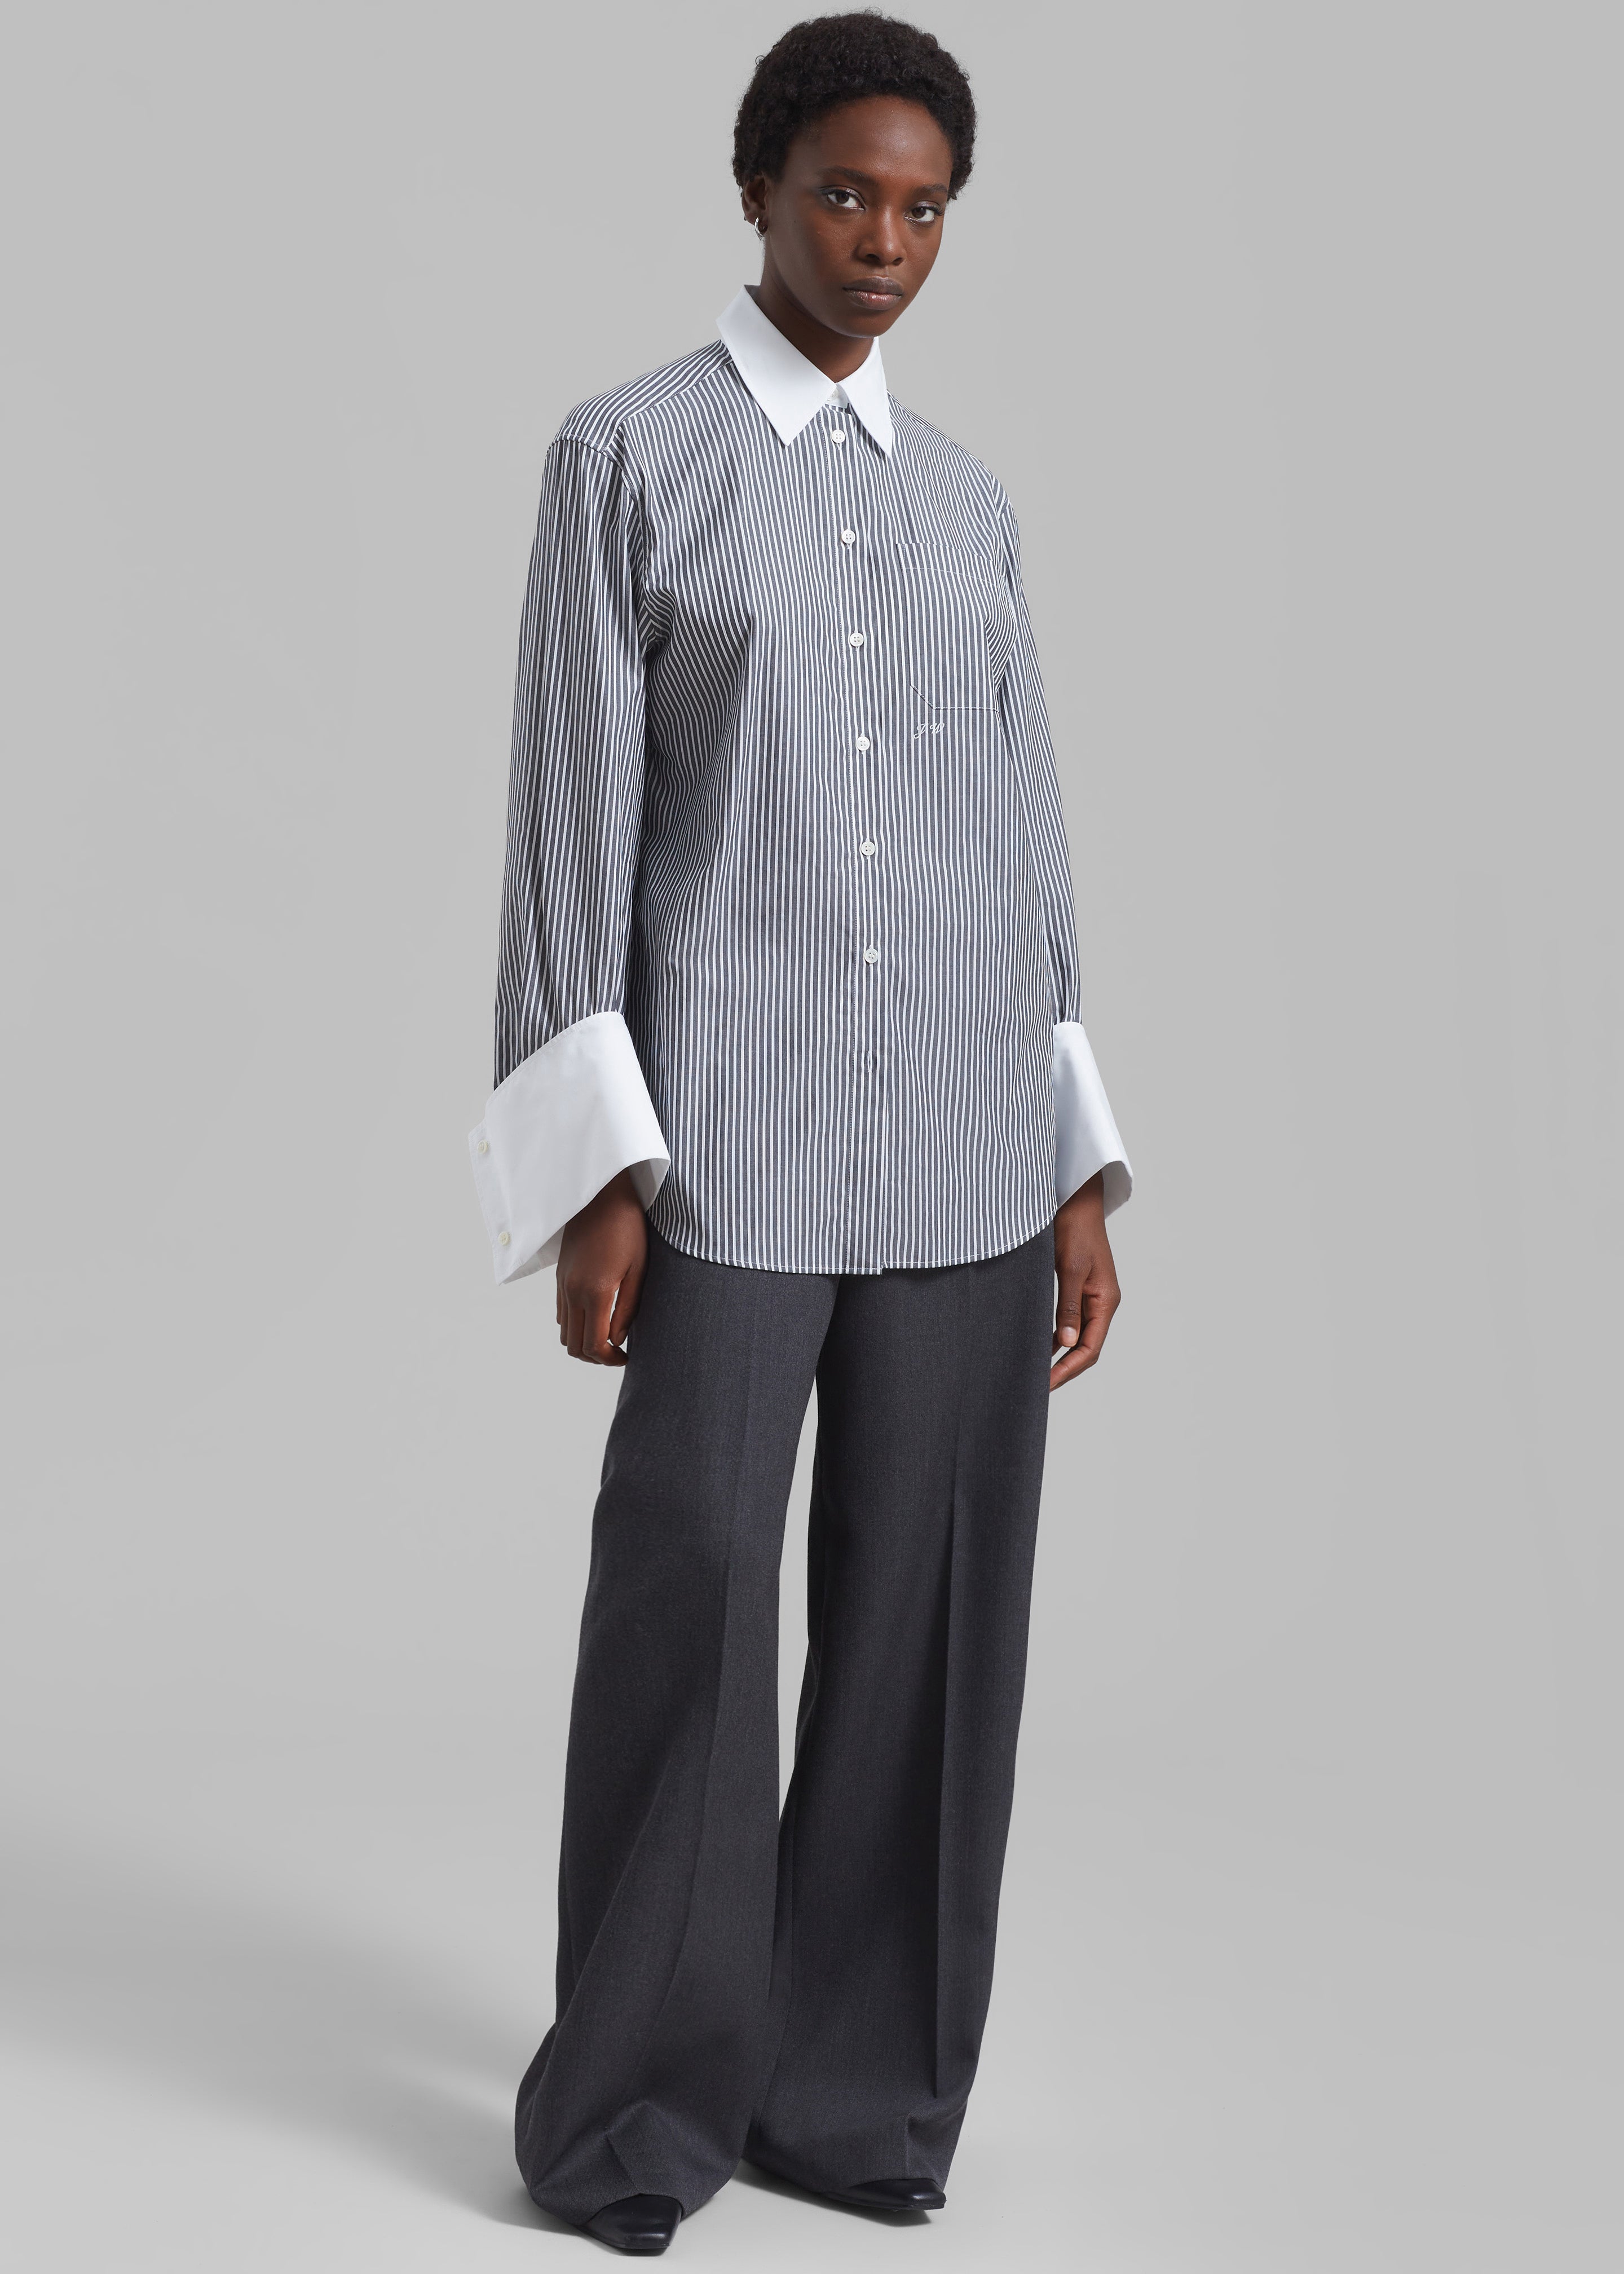 JW Anderson Oversized Cuff Shirt - Charcoal/White - 7